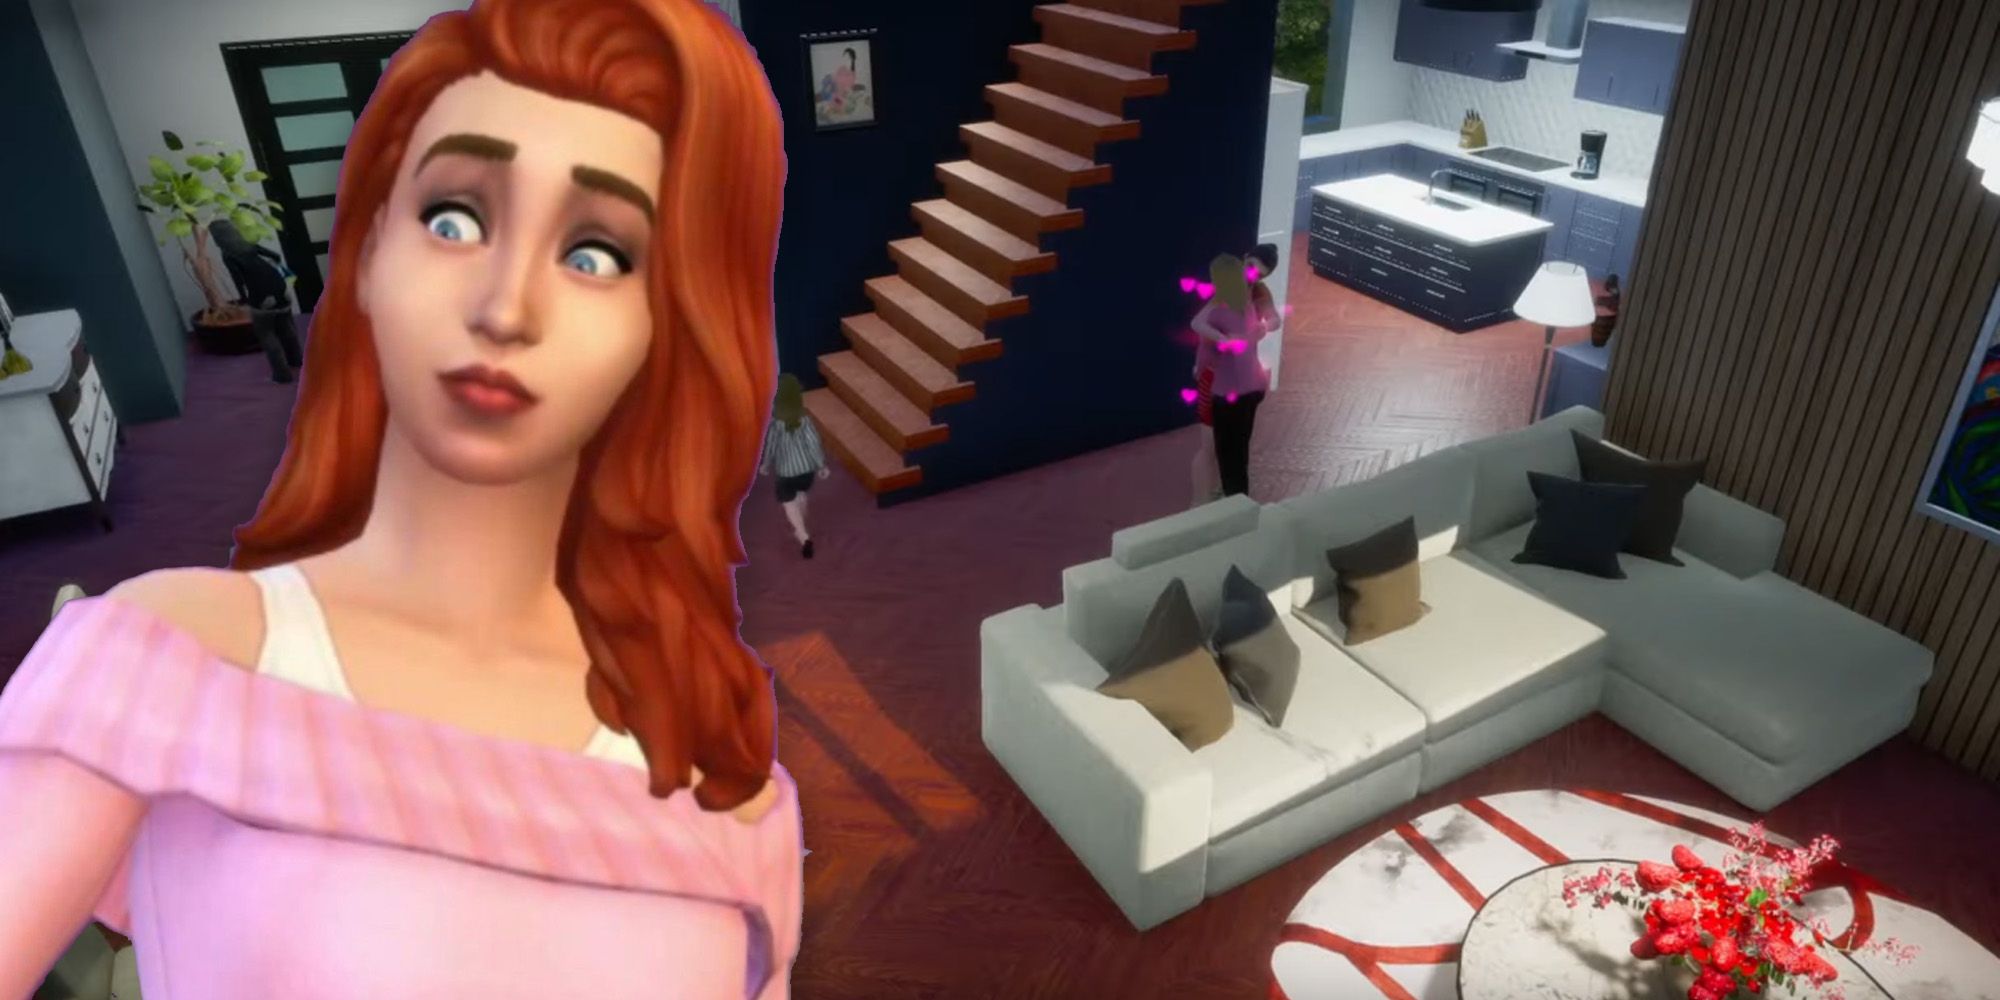 Red-haired woman from The Sims superimposed on a screenshot of upcoming life sim game Life By You.